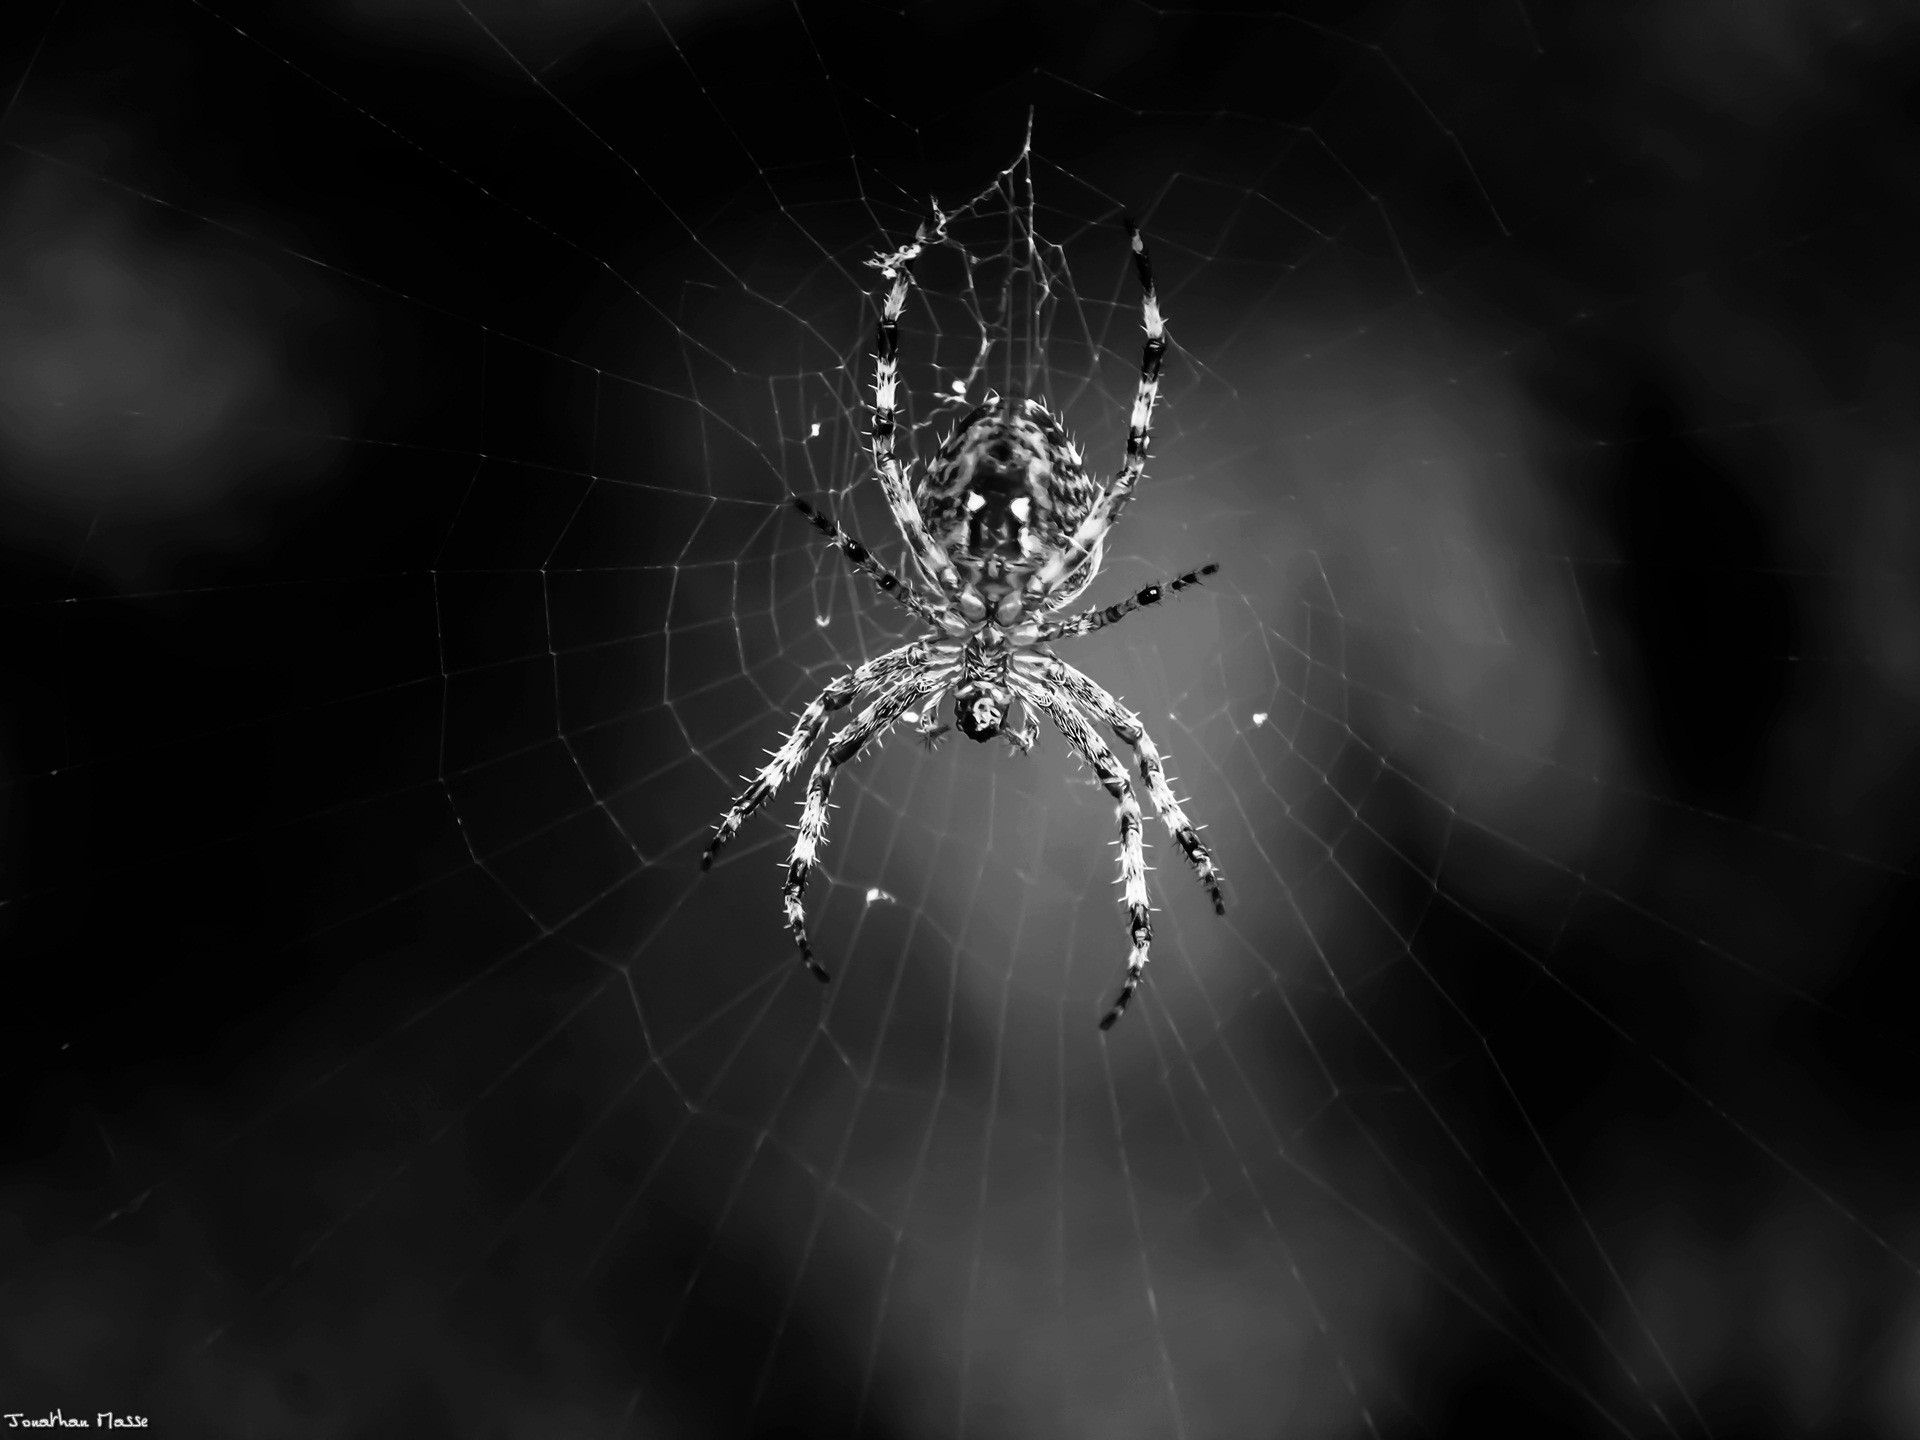 1920x1440 Spider wallpapers and stock photos